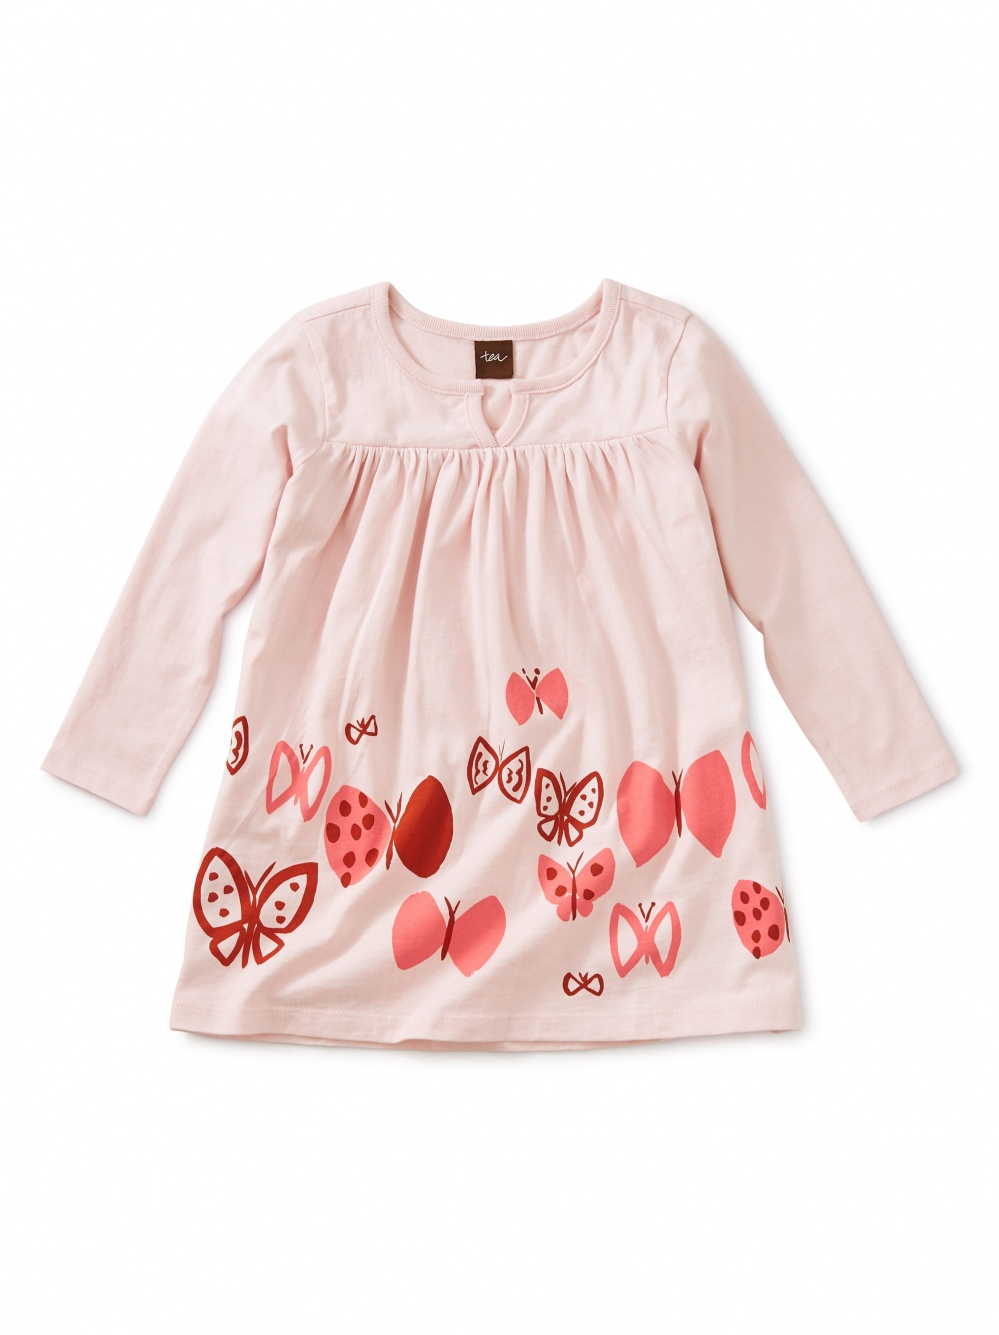 Butterflies Graphic Baby Dress | Tea Collection